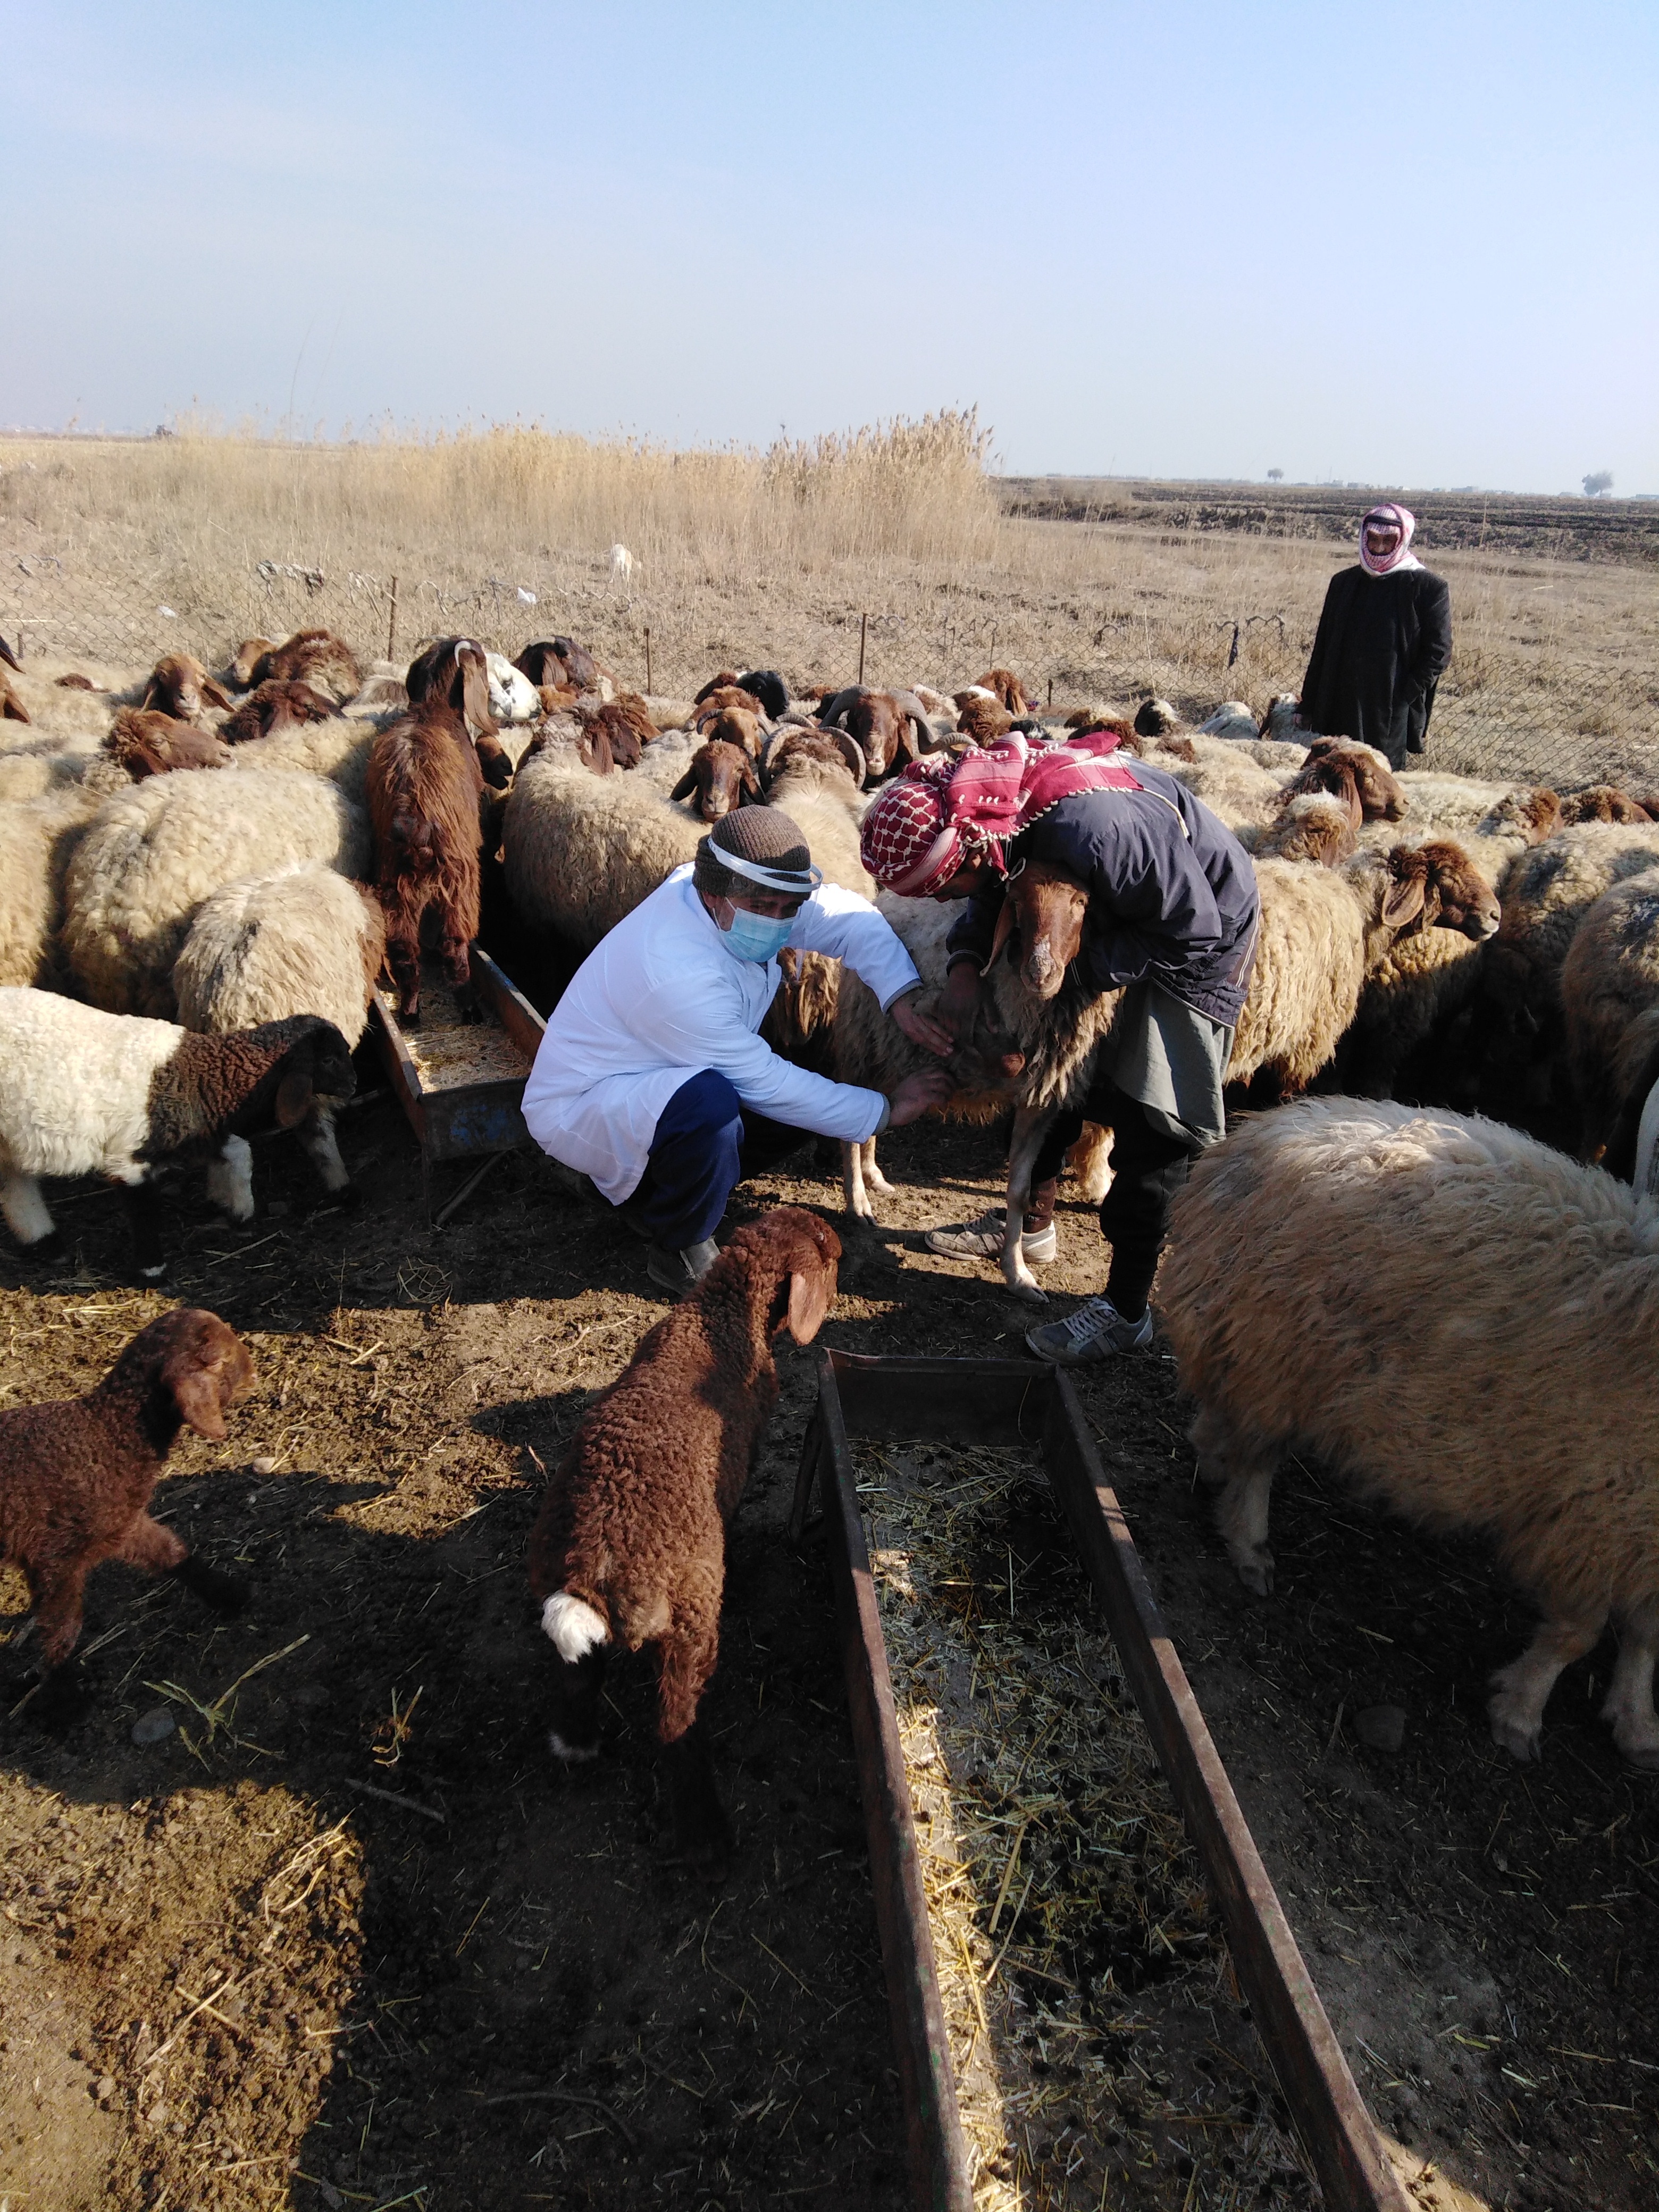 Strengthening veterinary care in Raqqa (Syria) through new veterinary clinics and mobile vet services to reach remote livestock communities